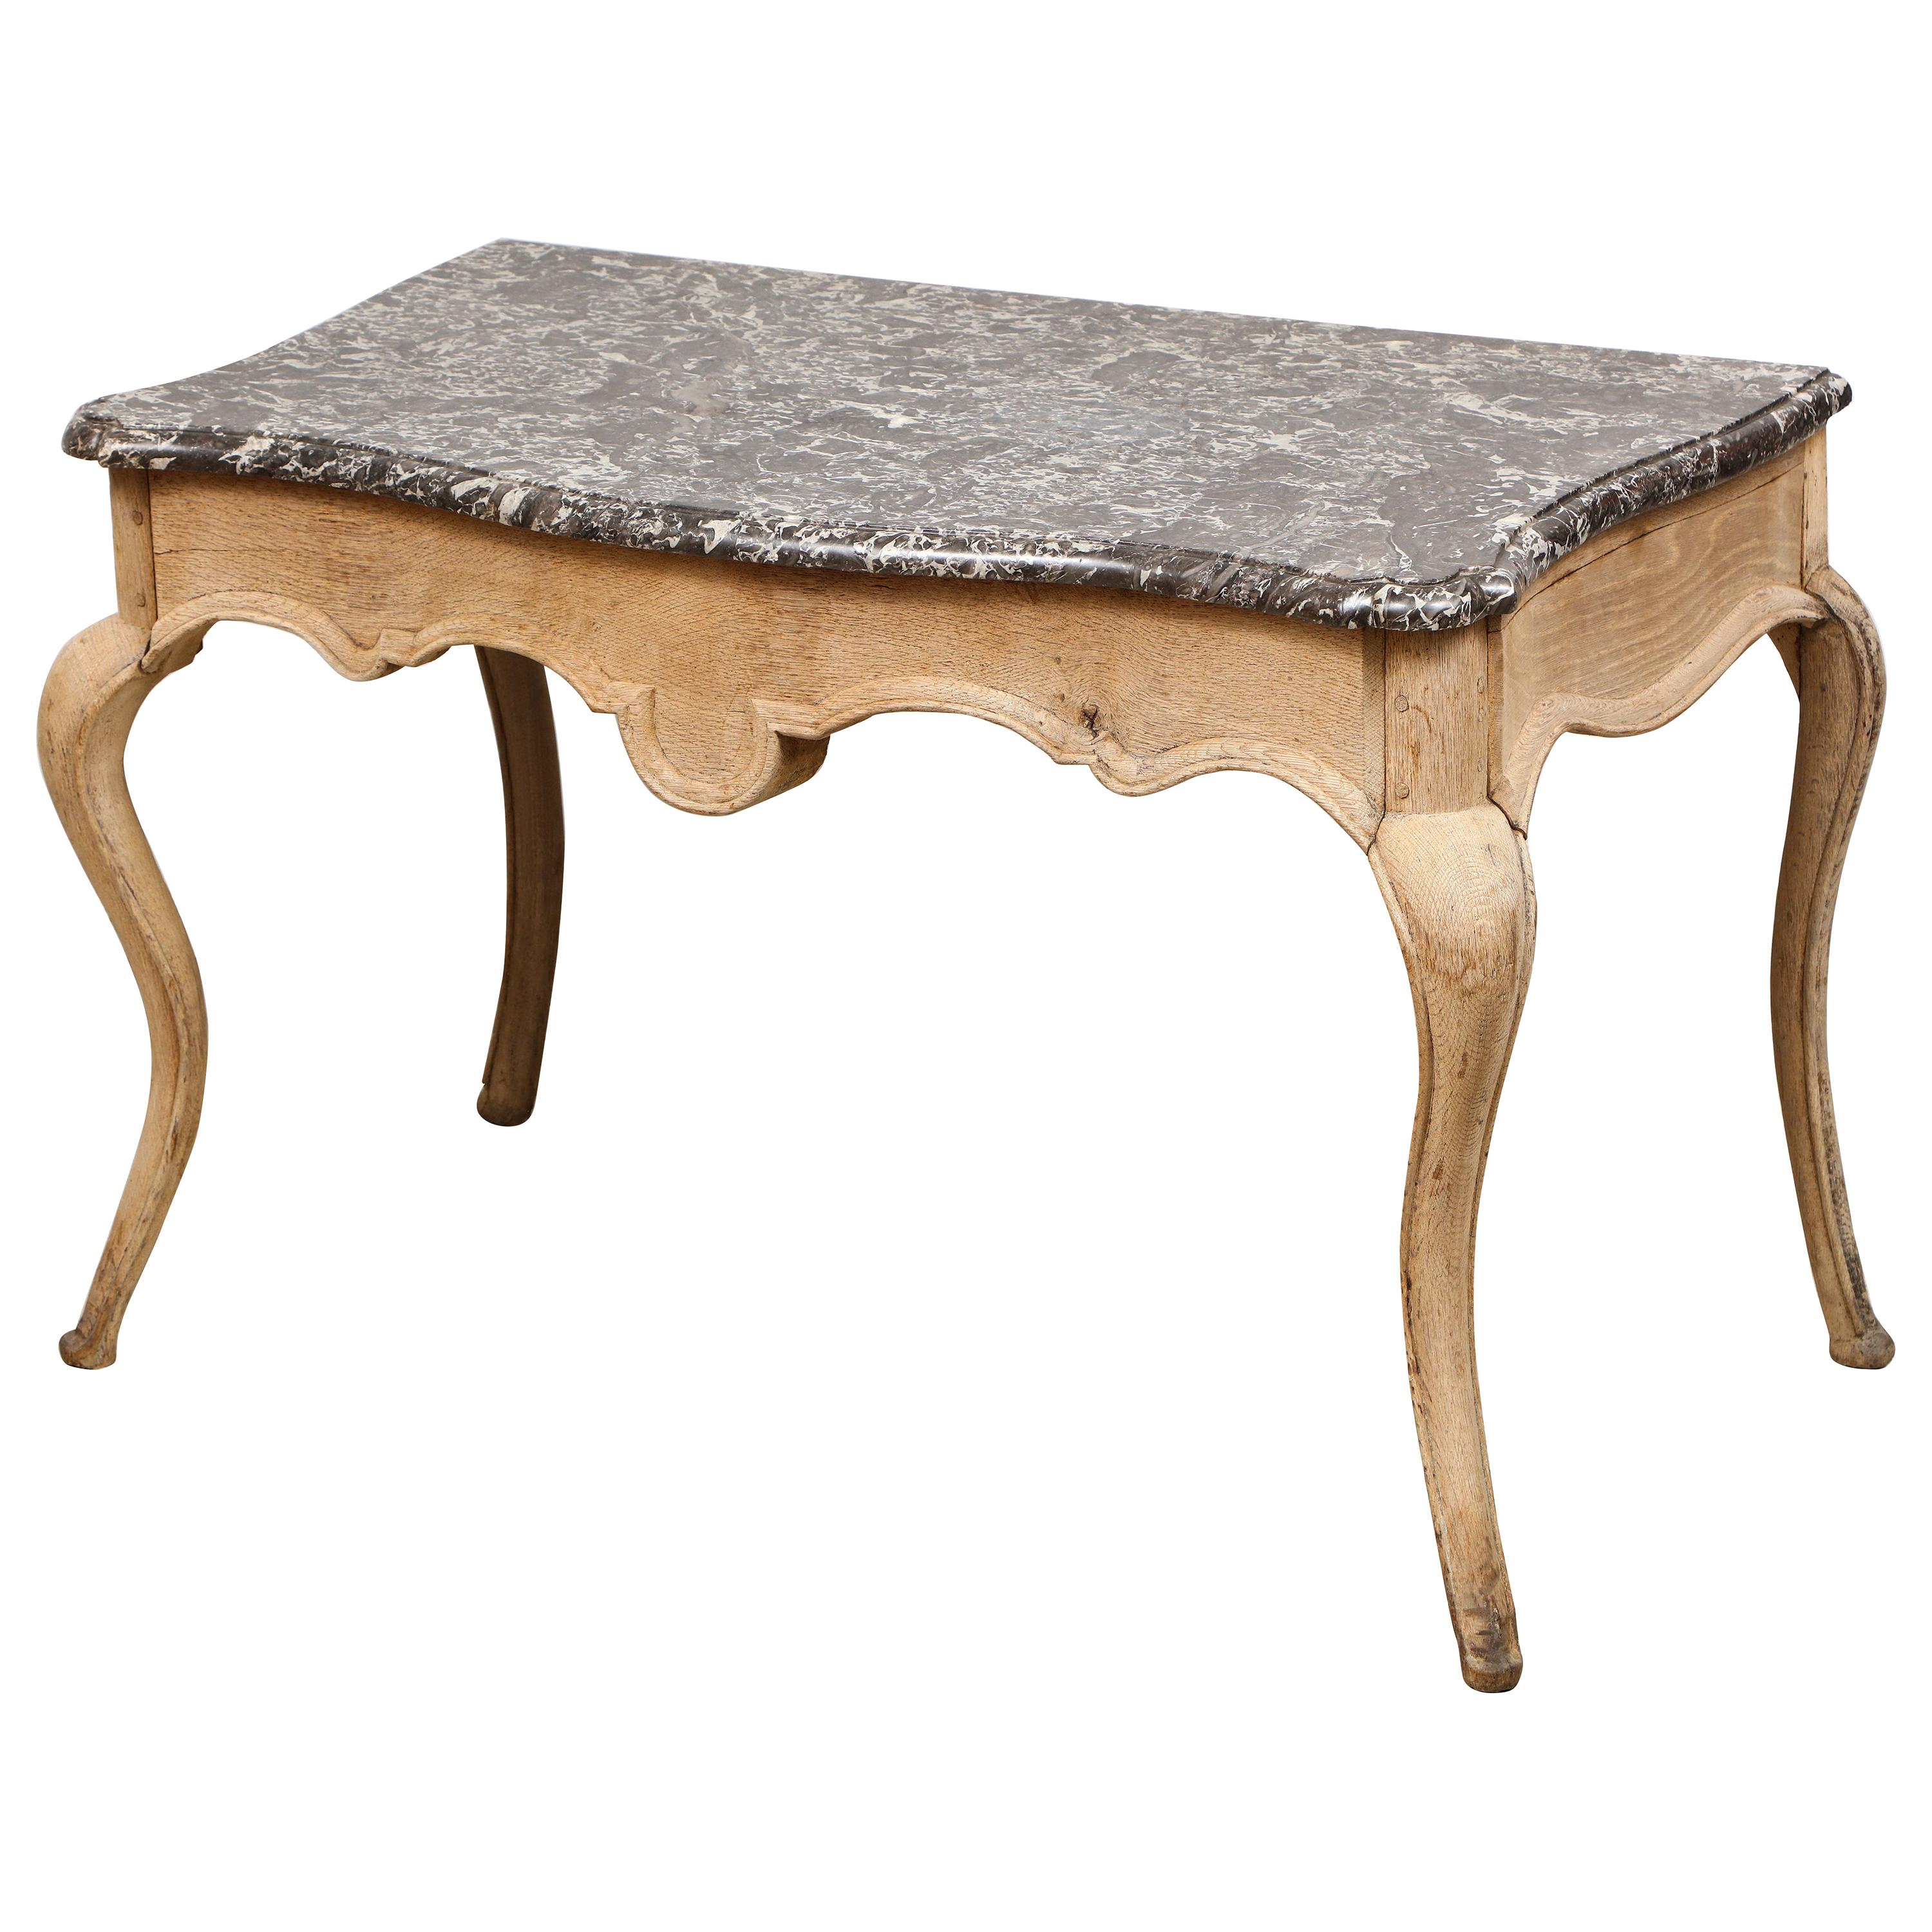 Whimsical Louis XV-Style Marble-Top Painted Table on Sabre Legs